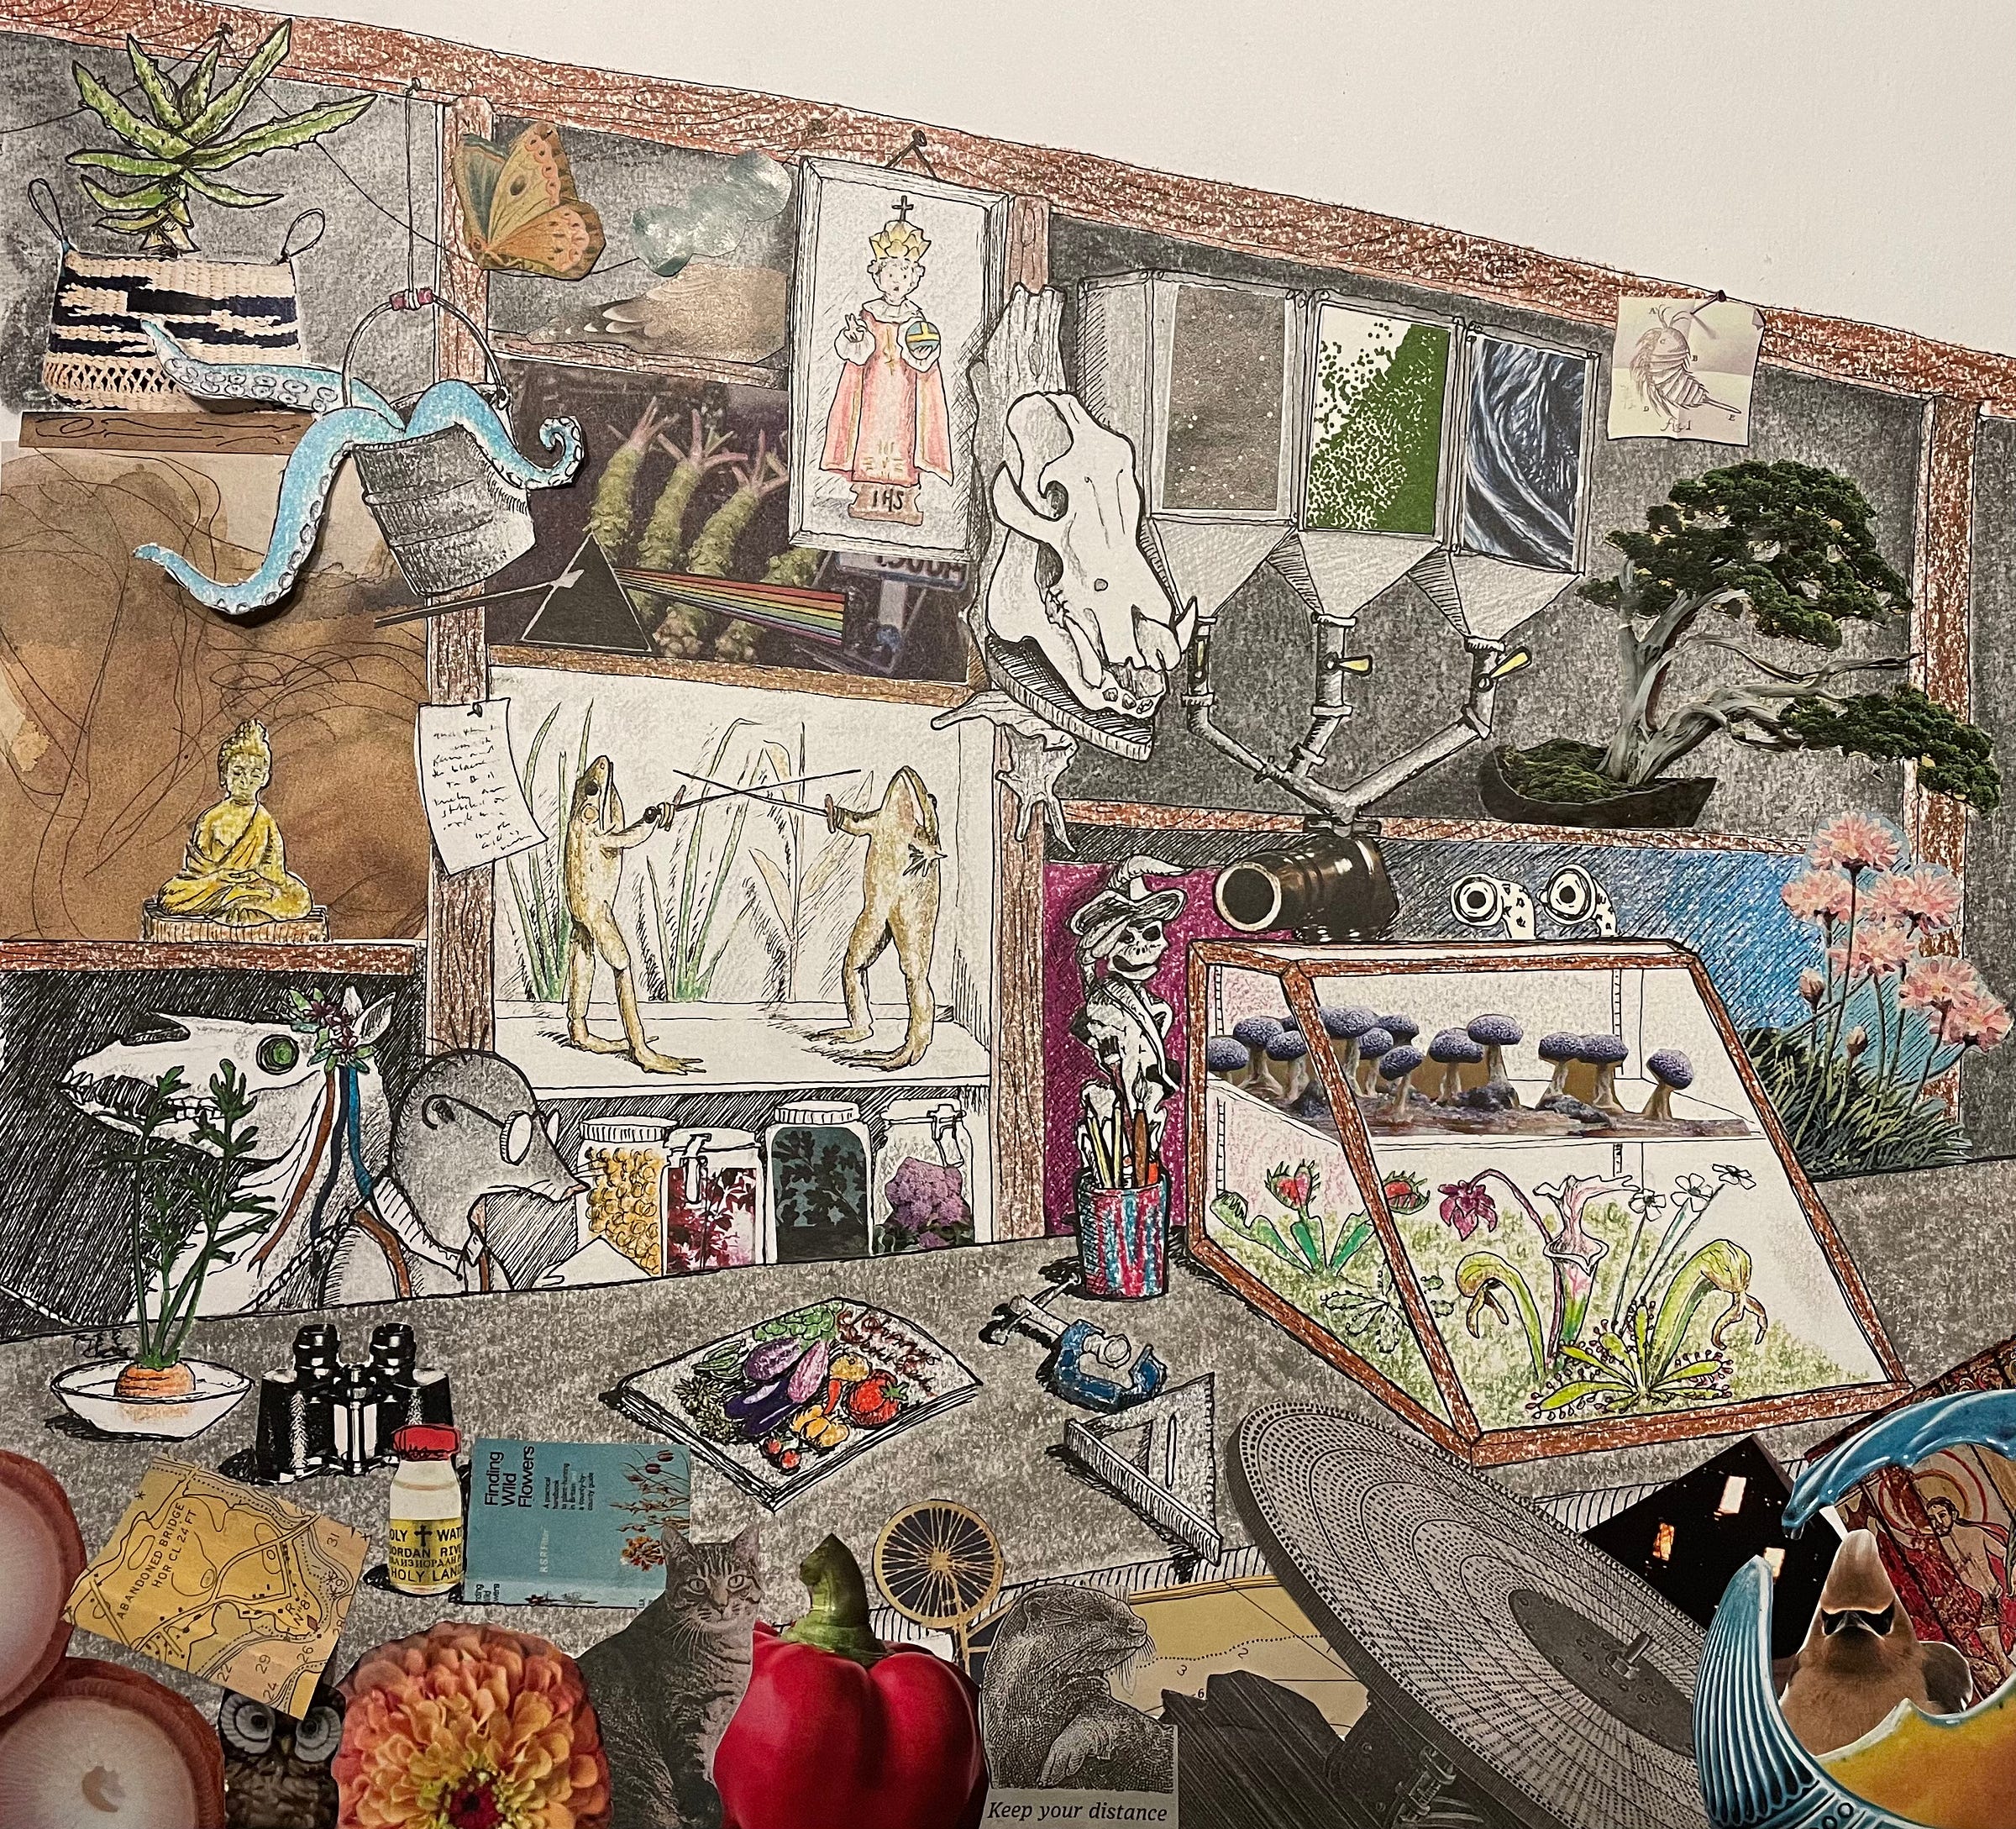 mixed media drawing/collage of the proprietor's shop; skulls, plants, paintings, a pair of dueling taxidermied frogs, etc.